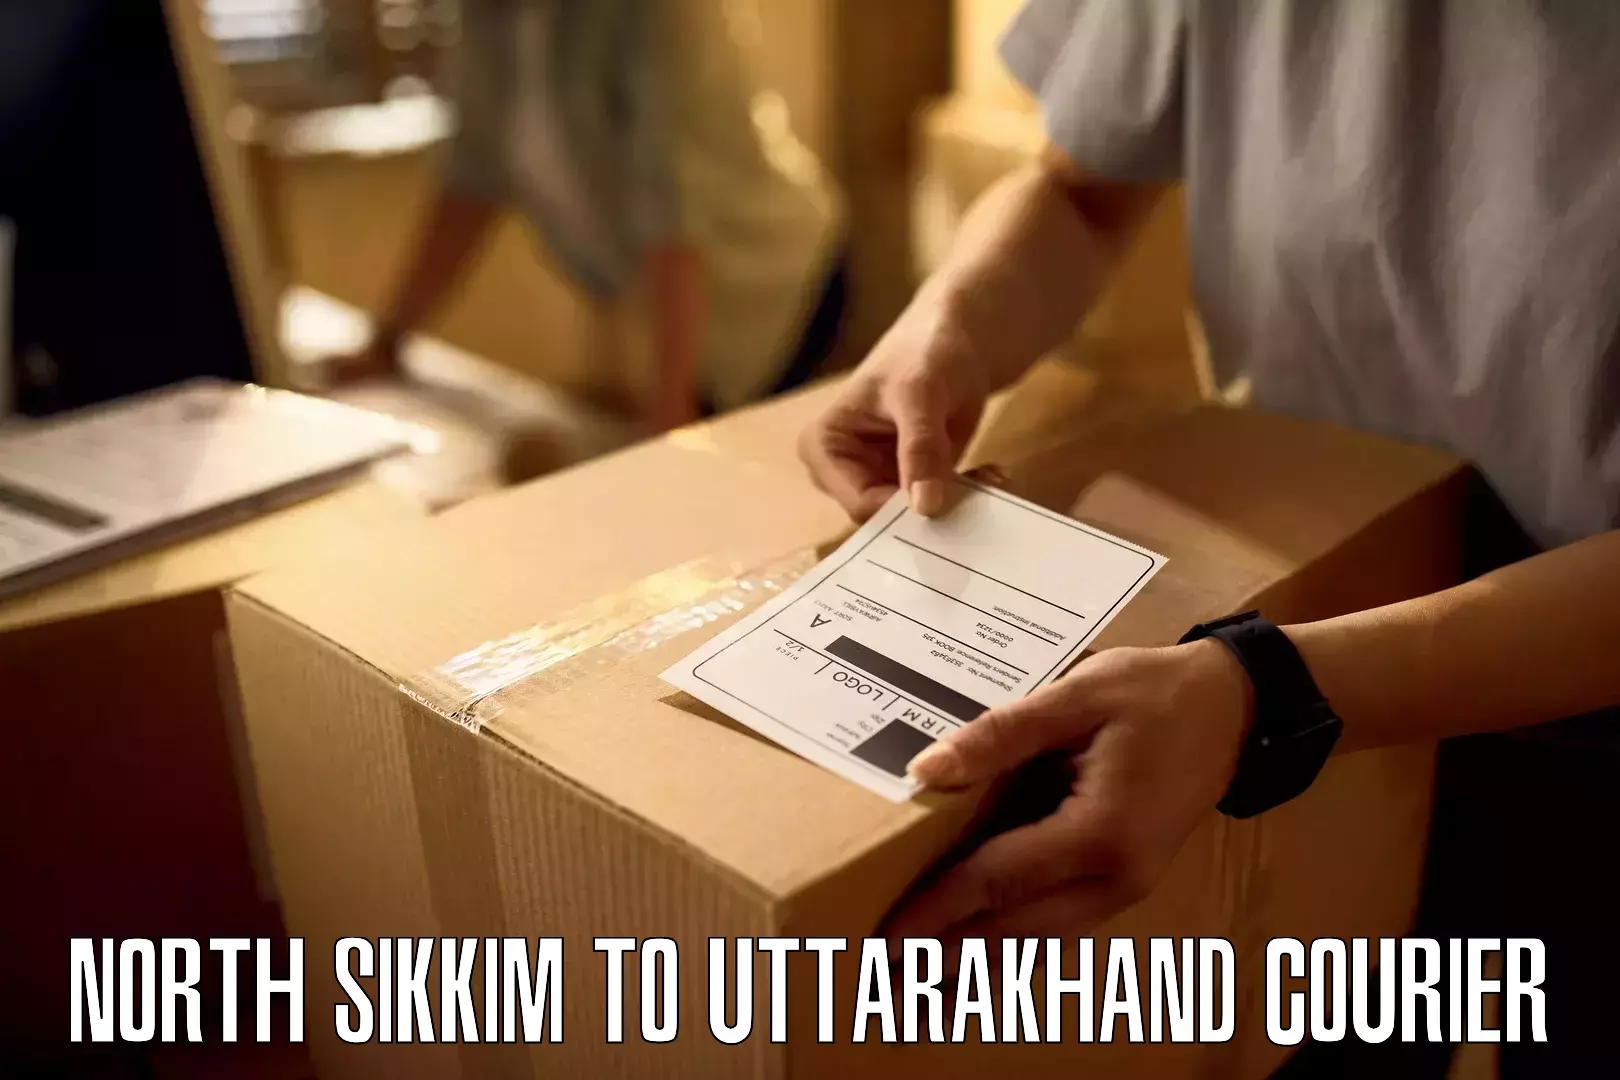 Cash on delivery service North Sikkim to Uttarakhand